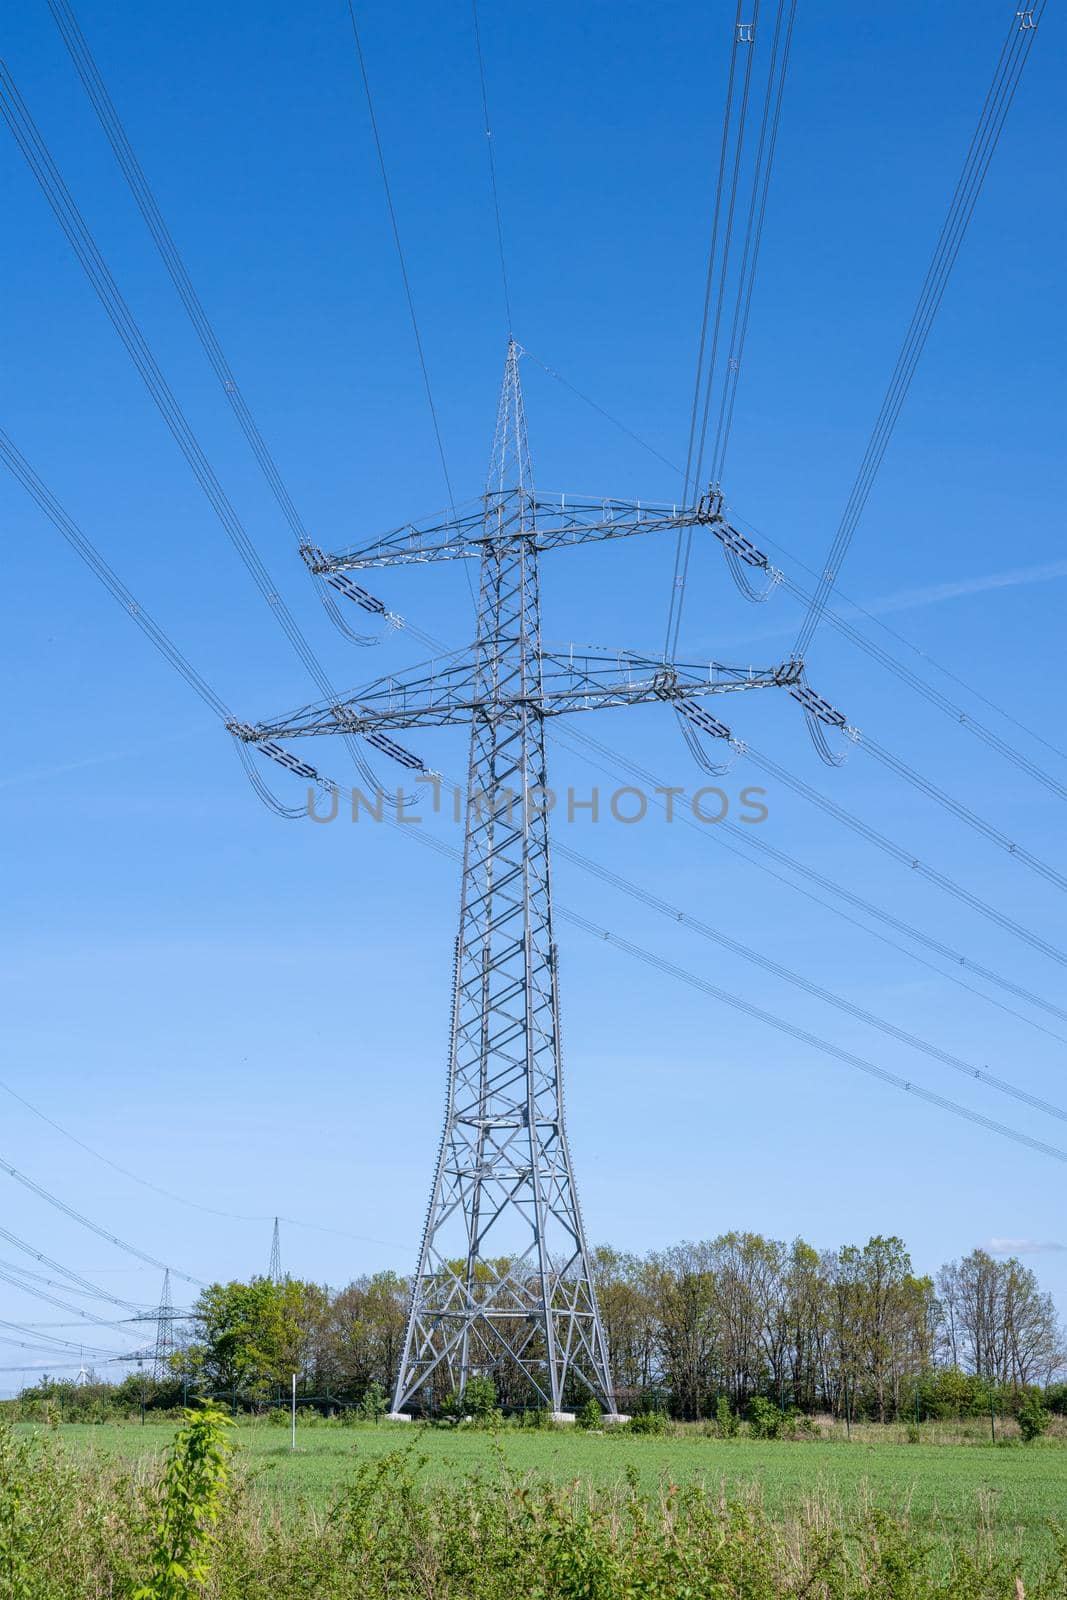 An electricity pylon with power lines seen in Germany